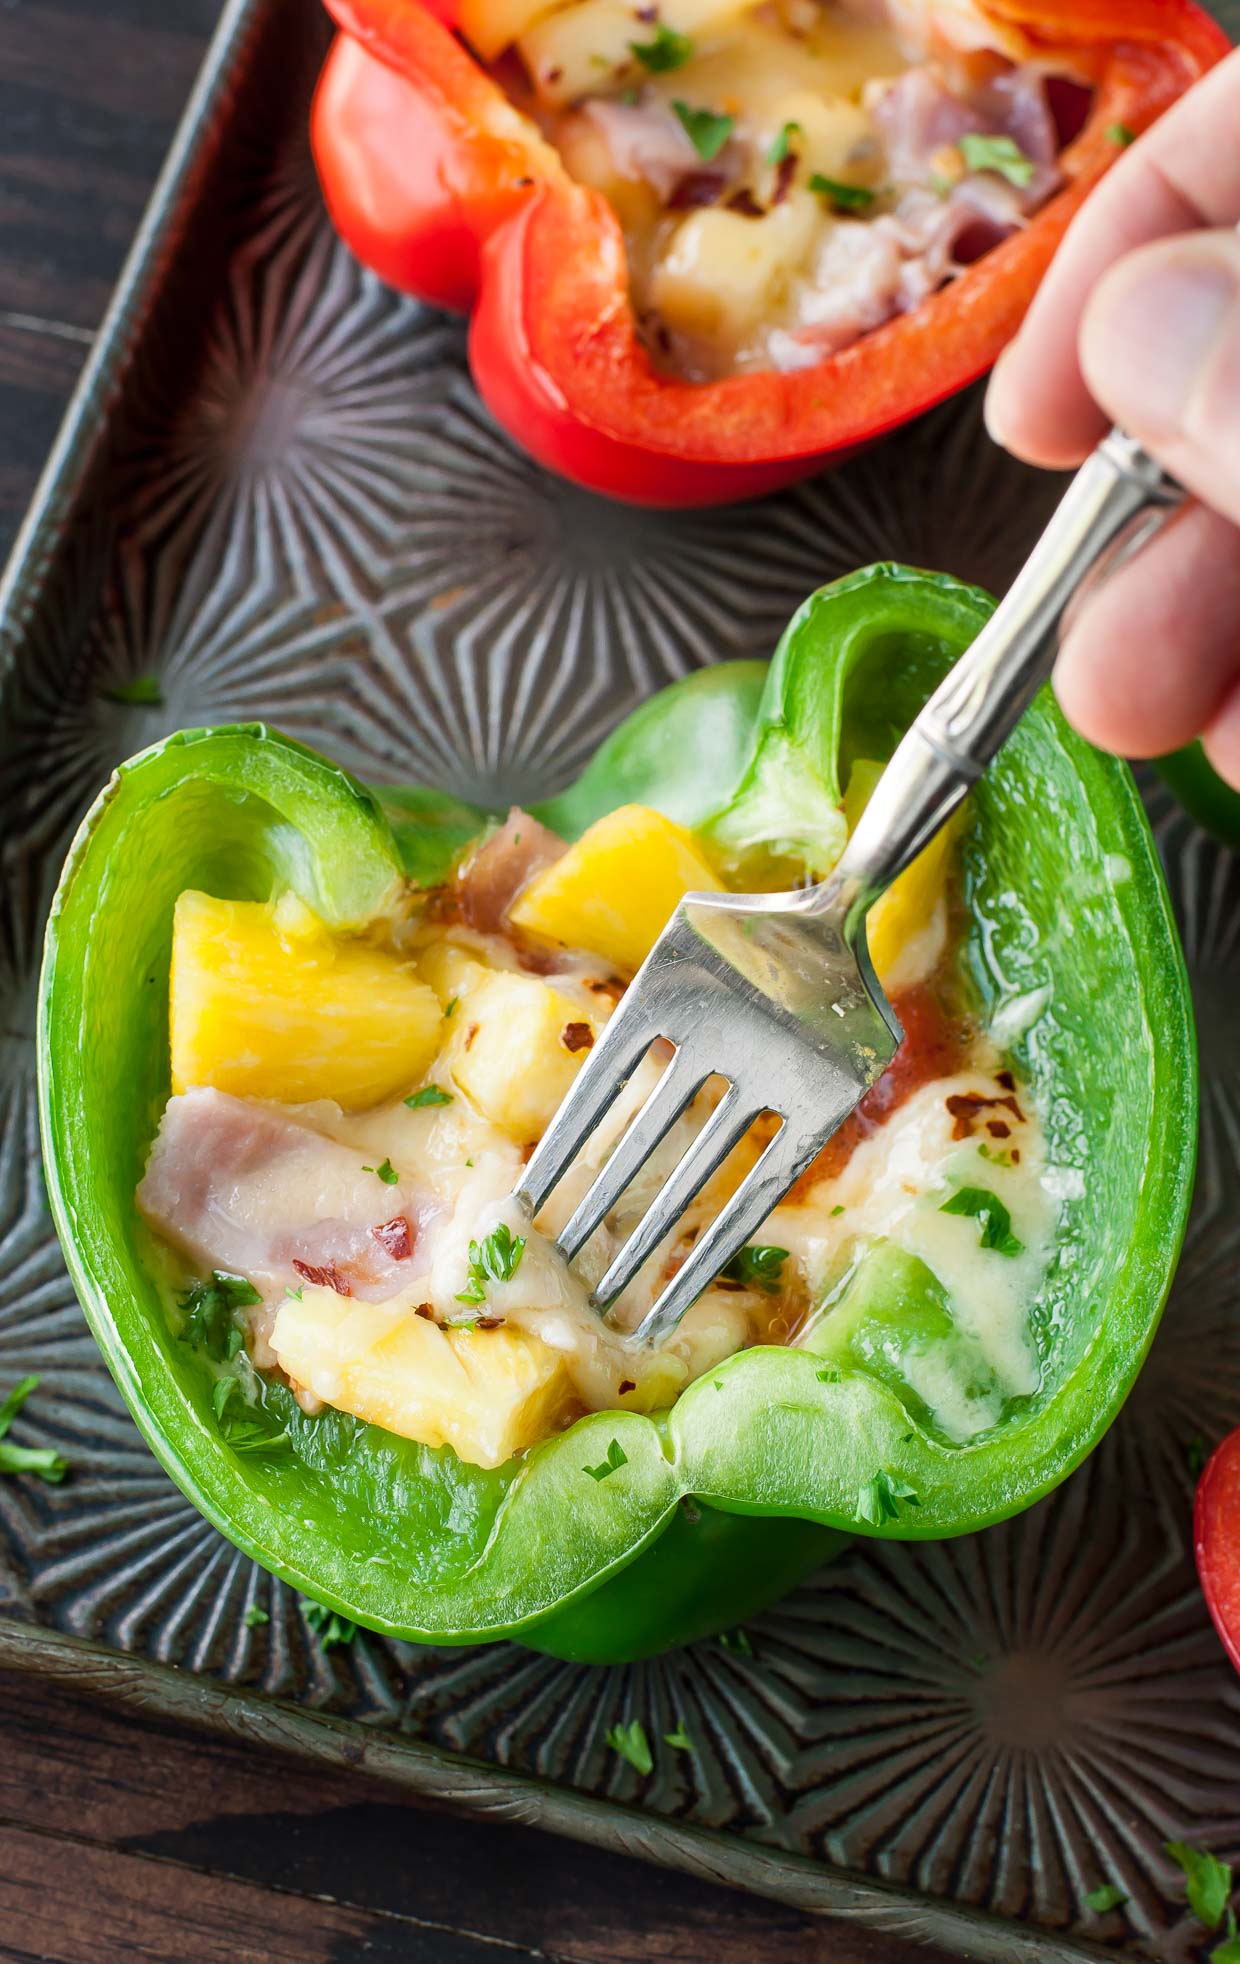 Hawaiian Bell Pepper Pizzas: ditch the crust and grab a bell pepper!